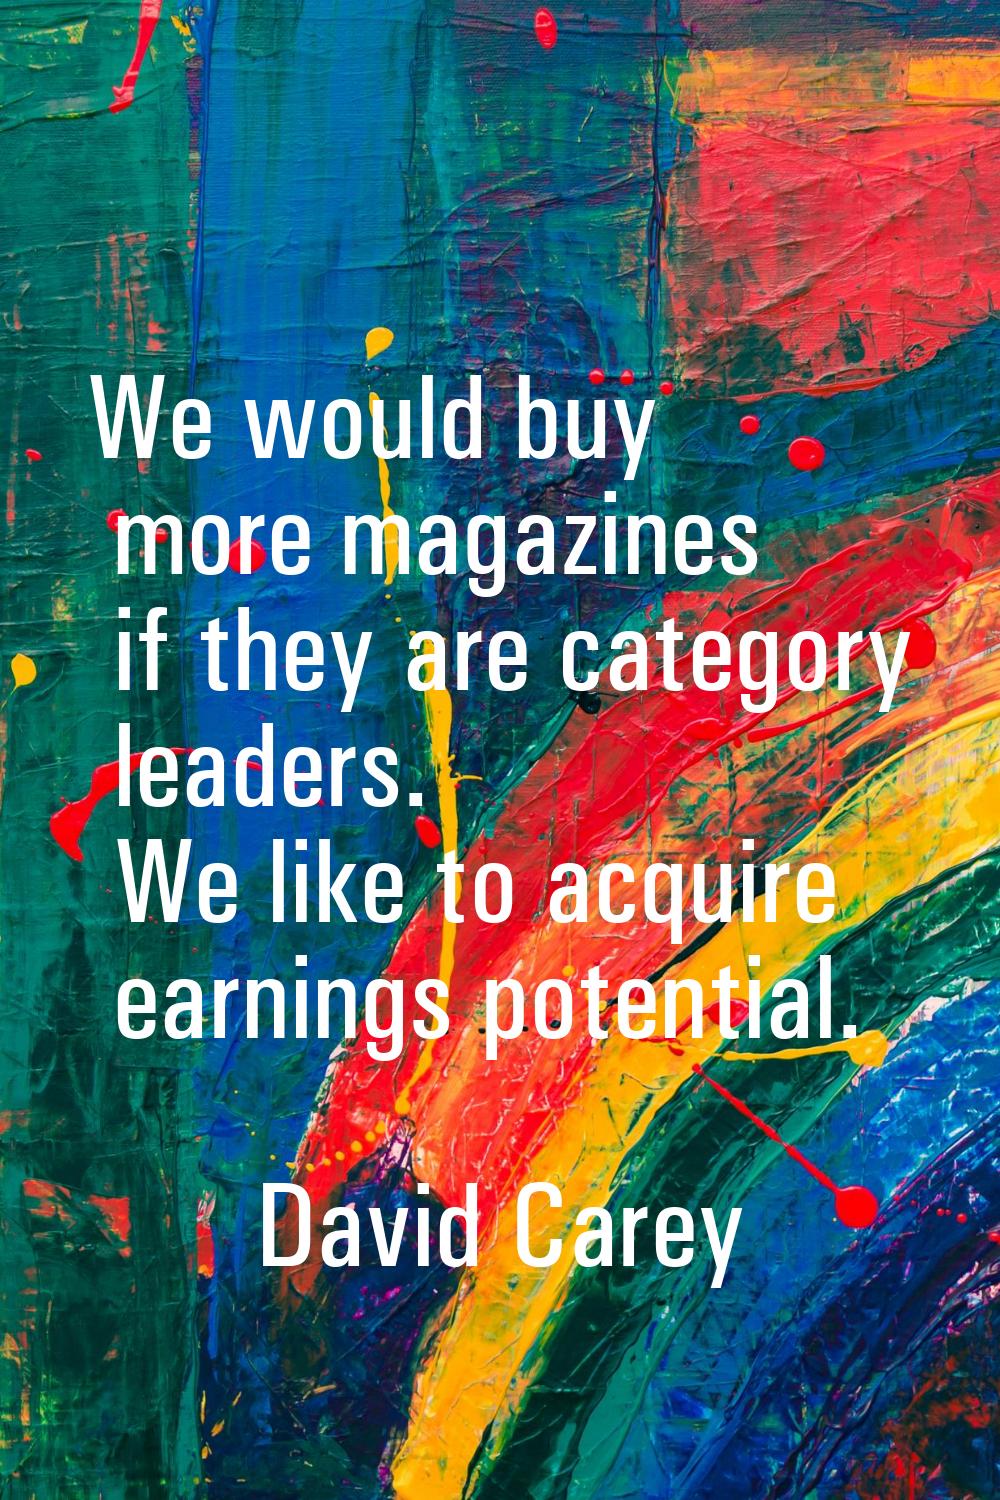 We would buy more magazines if they are category leaders. We like to acquire earnings potential.